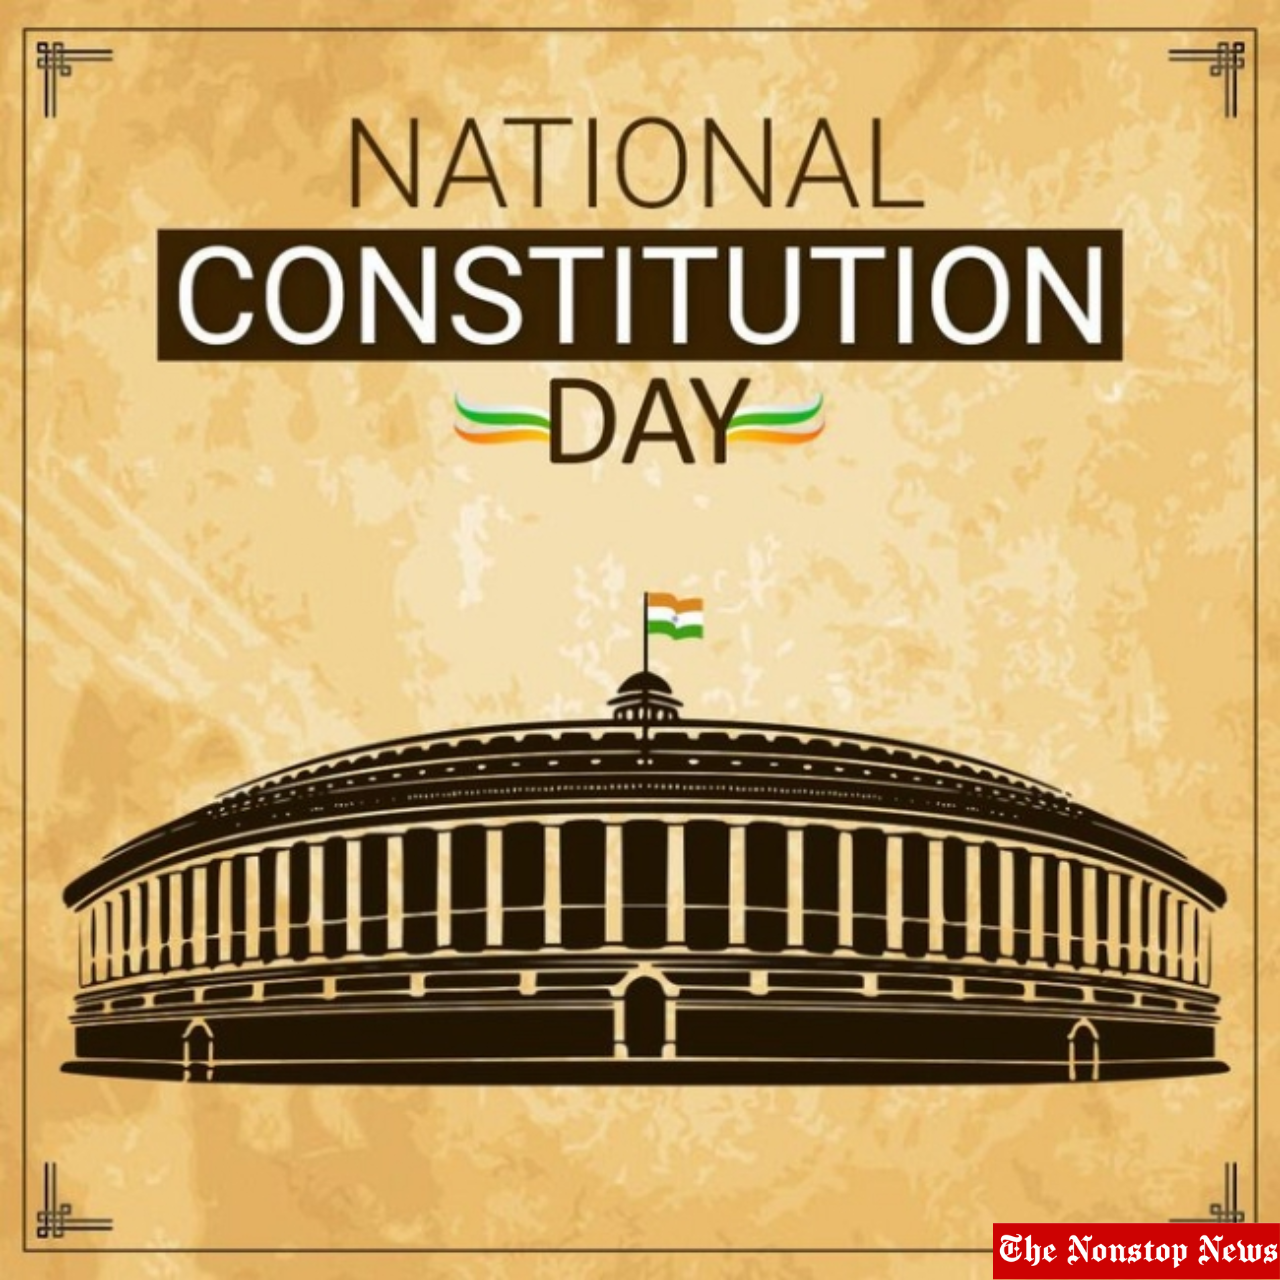 Constitution Day 2022: Current Theme, Slogans, Quotes, Posters, Messages, Drawings, Banners, Greetings, and Images